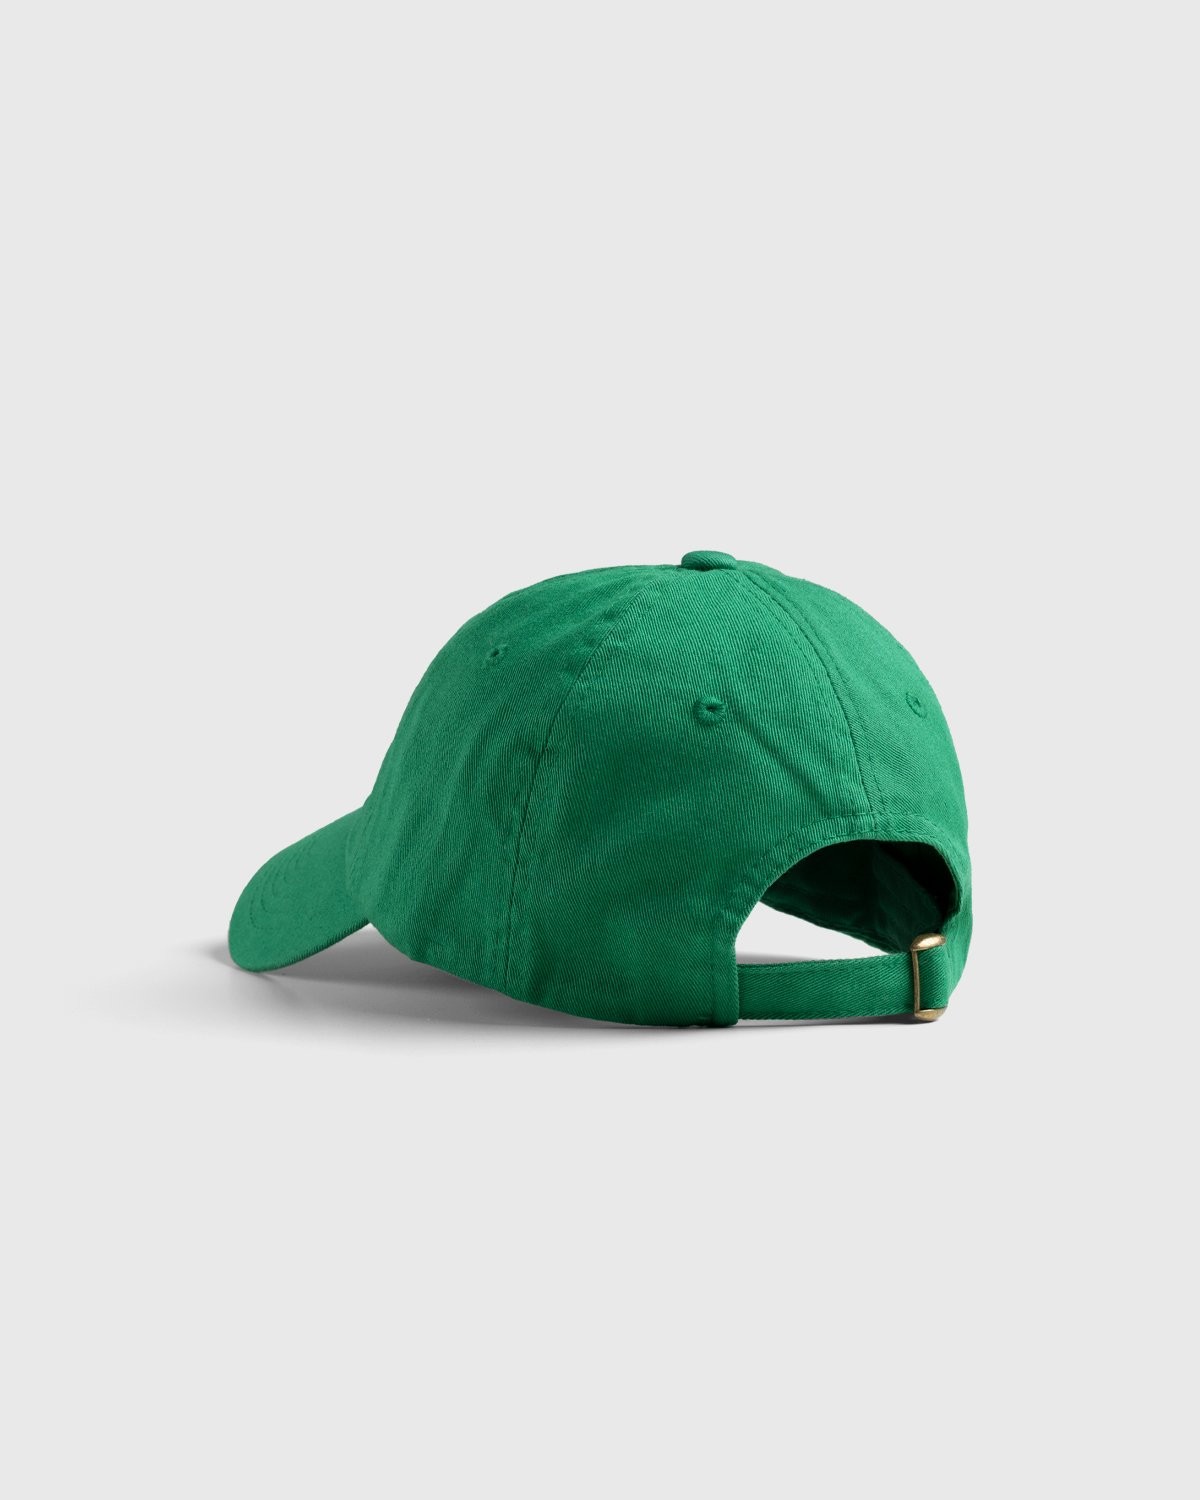 HO HO COCO – Handle With Care Cap Green | Highsnobiety Shop